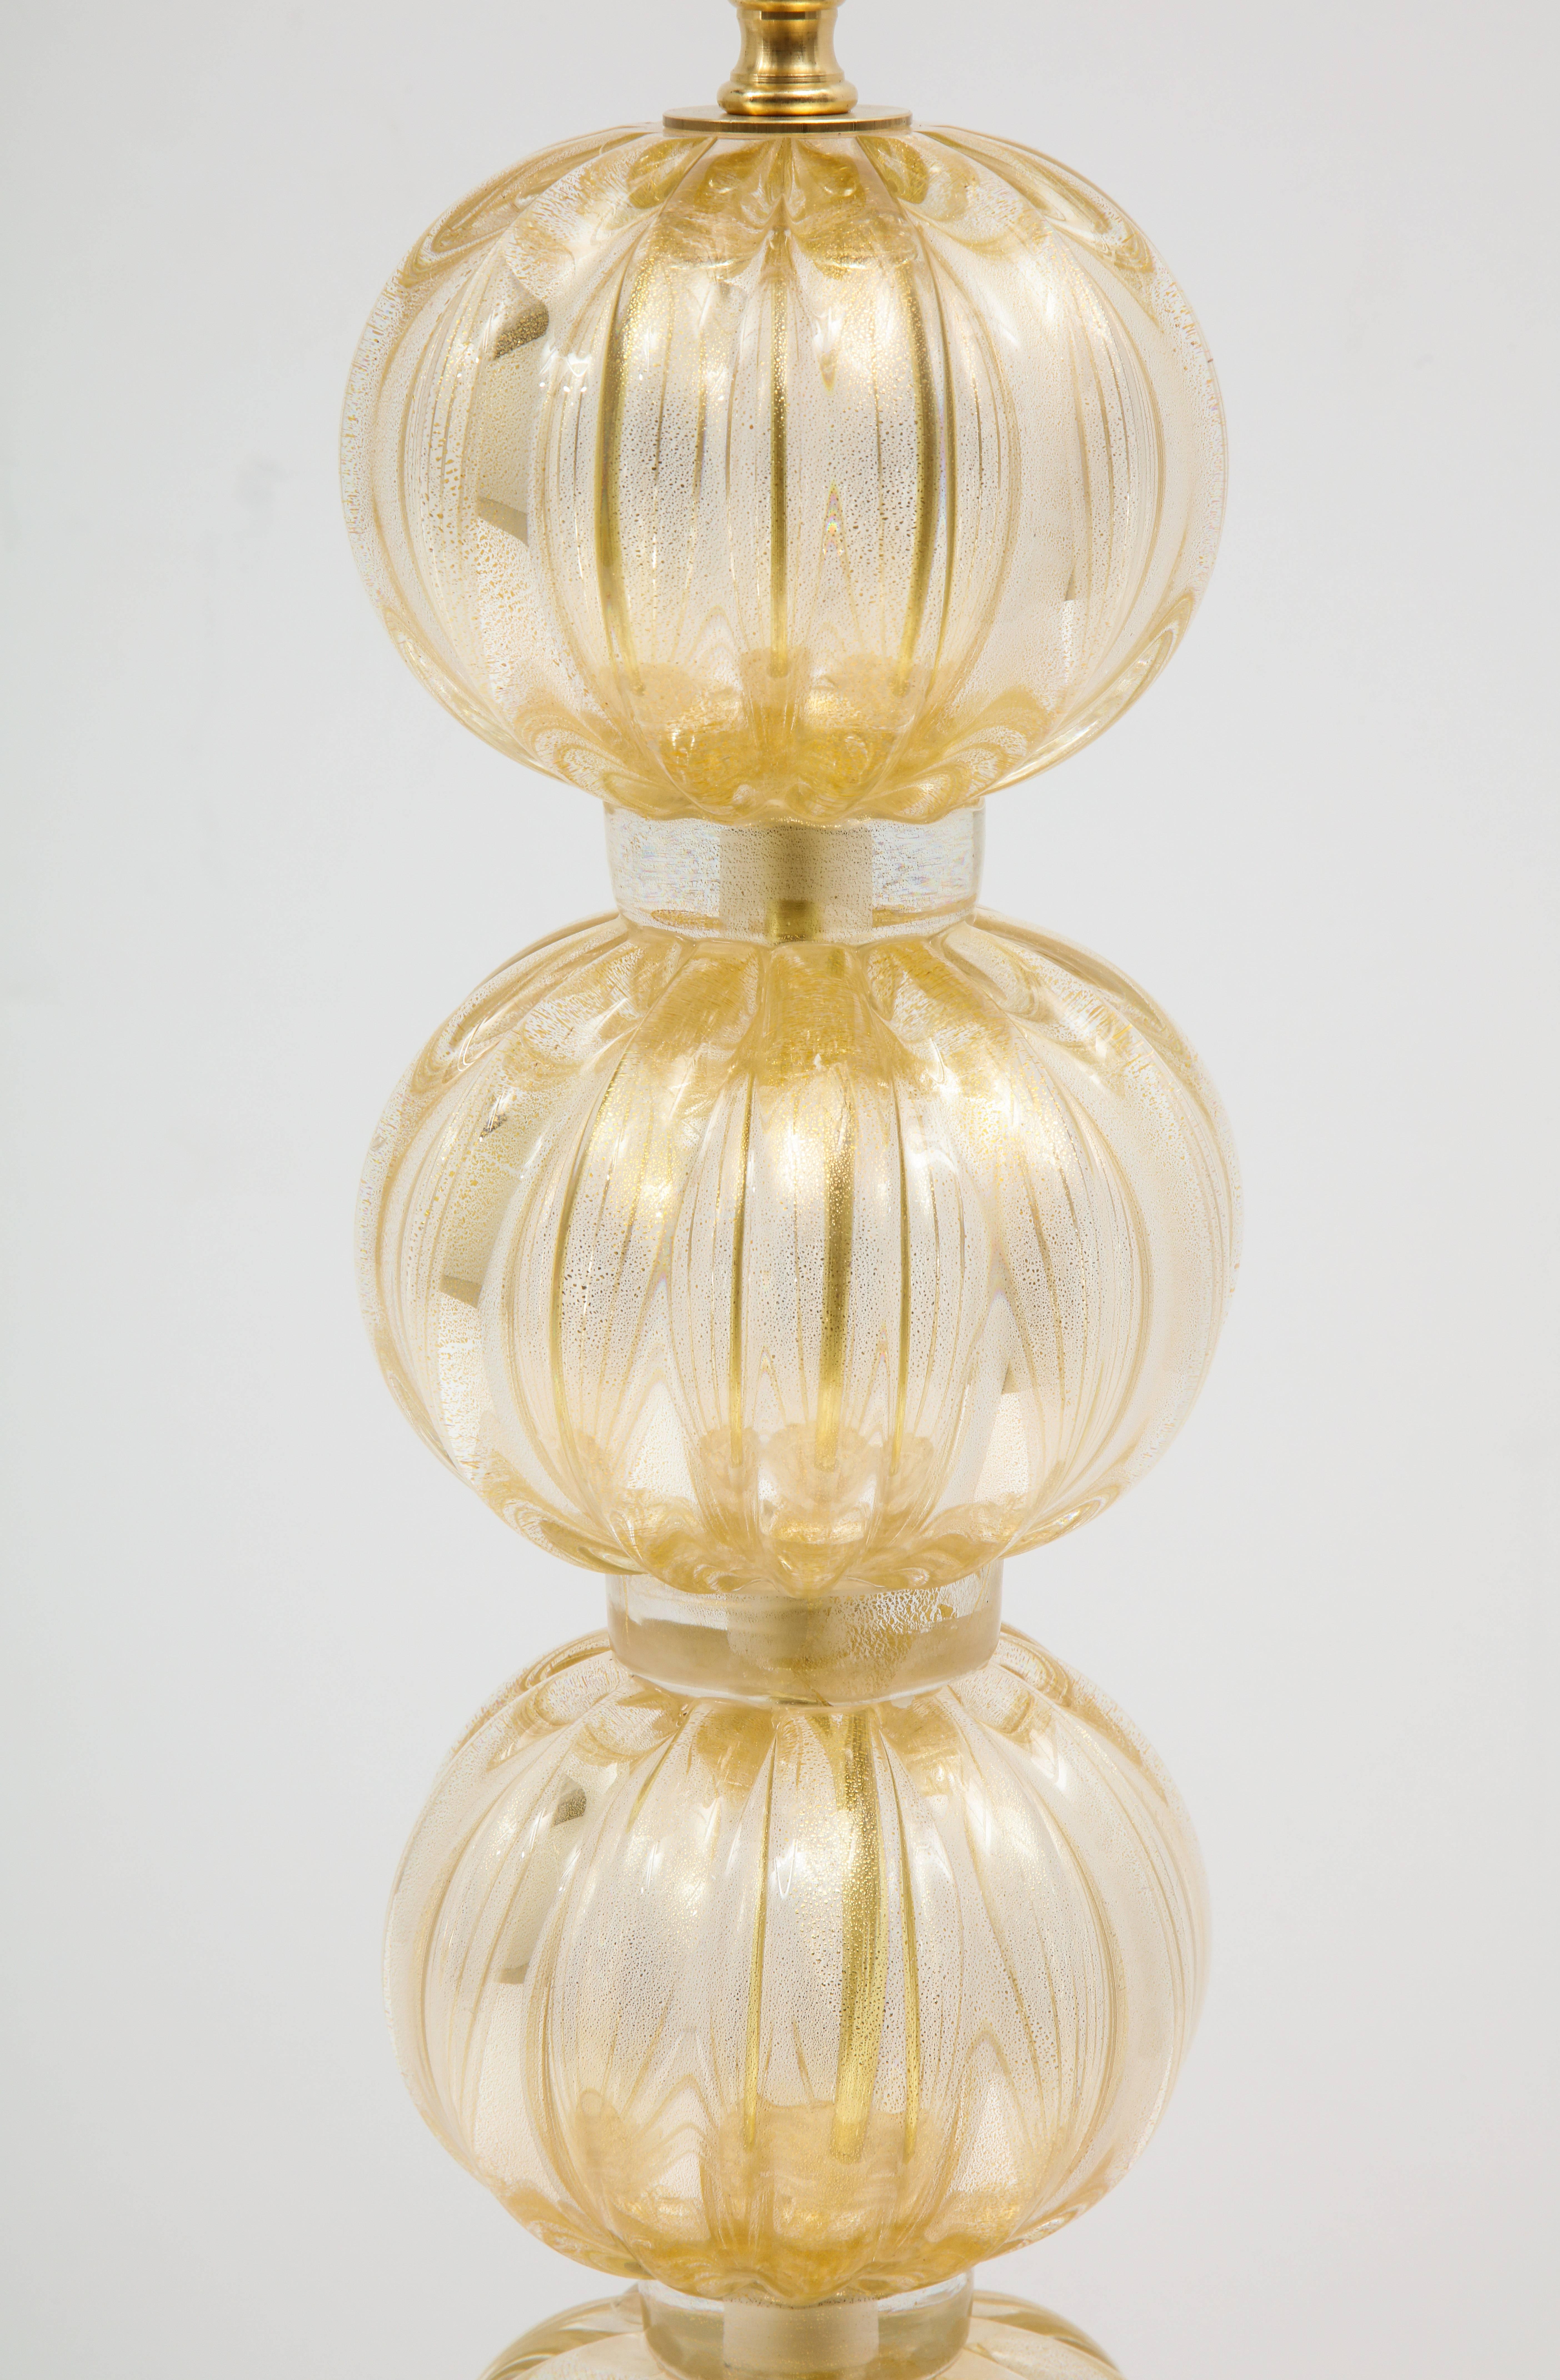 Pair of Italian Murano Gold lamps consisting of clear glass infused with 23-karat gold, creating a rich and luminous effect. Each of the four ridged spheres are separated by glass rings with gold flecks and all sit atop a ridged glass oval cup,